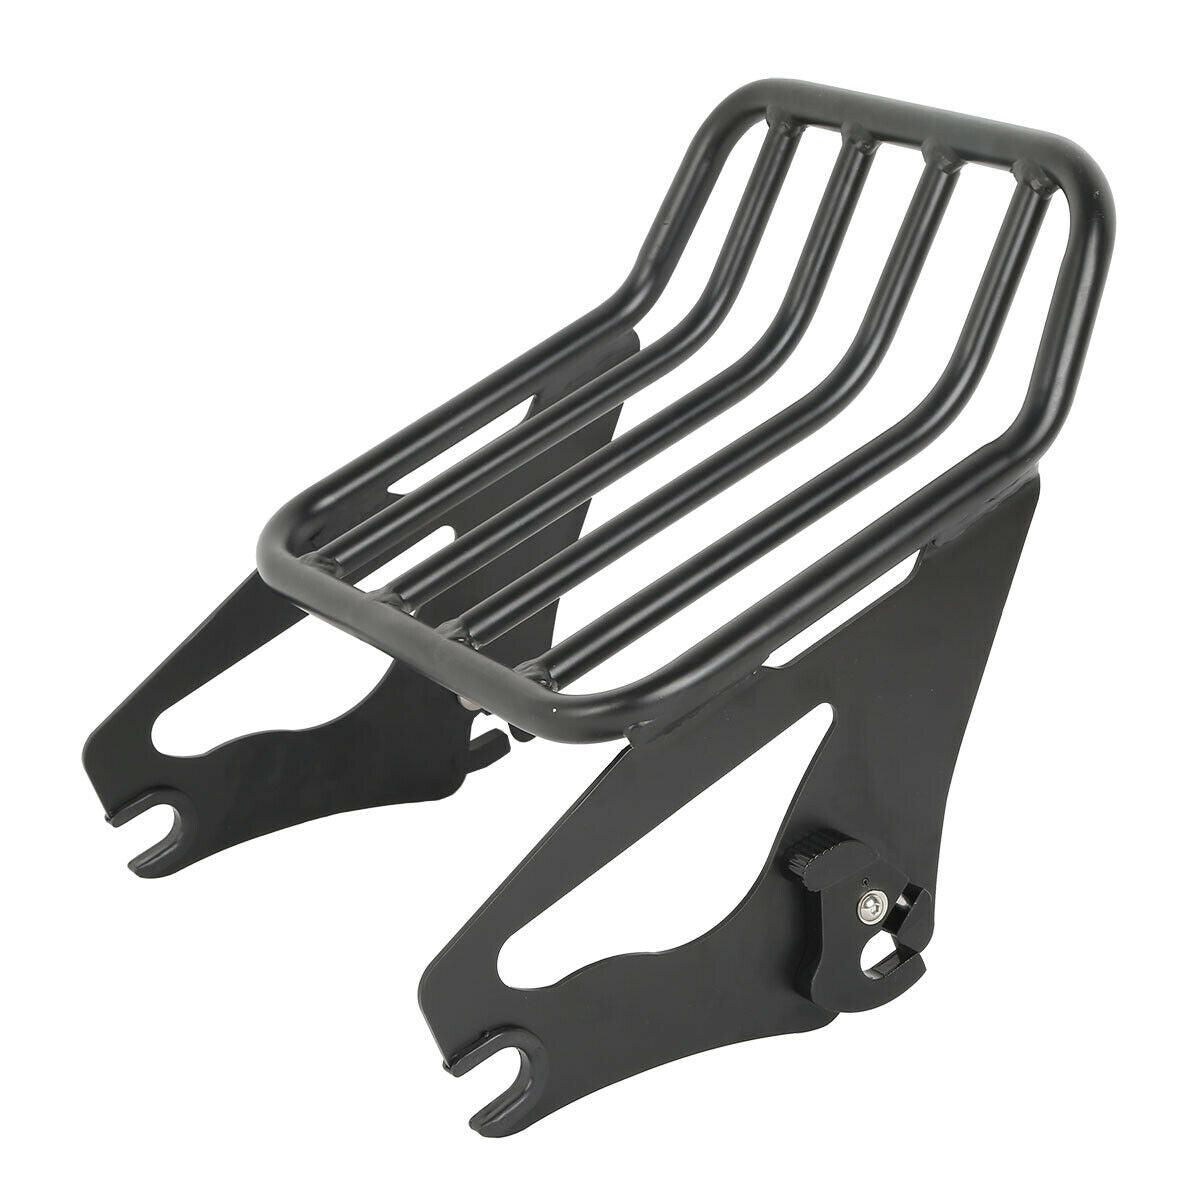 2-UP Air Wing Luggage Rack Fit For Harley Electra Street Glide Road King 09-21 - Moto Life Products